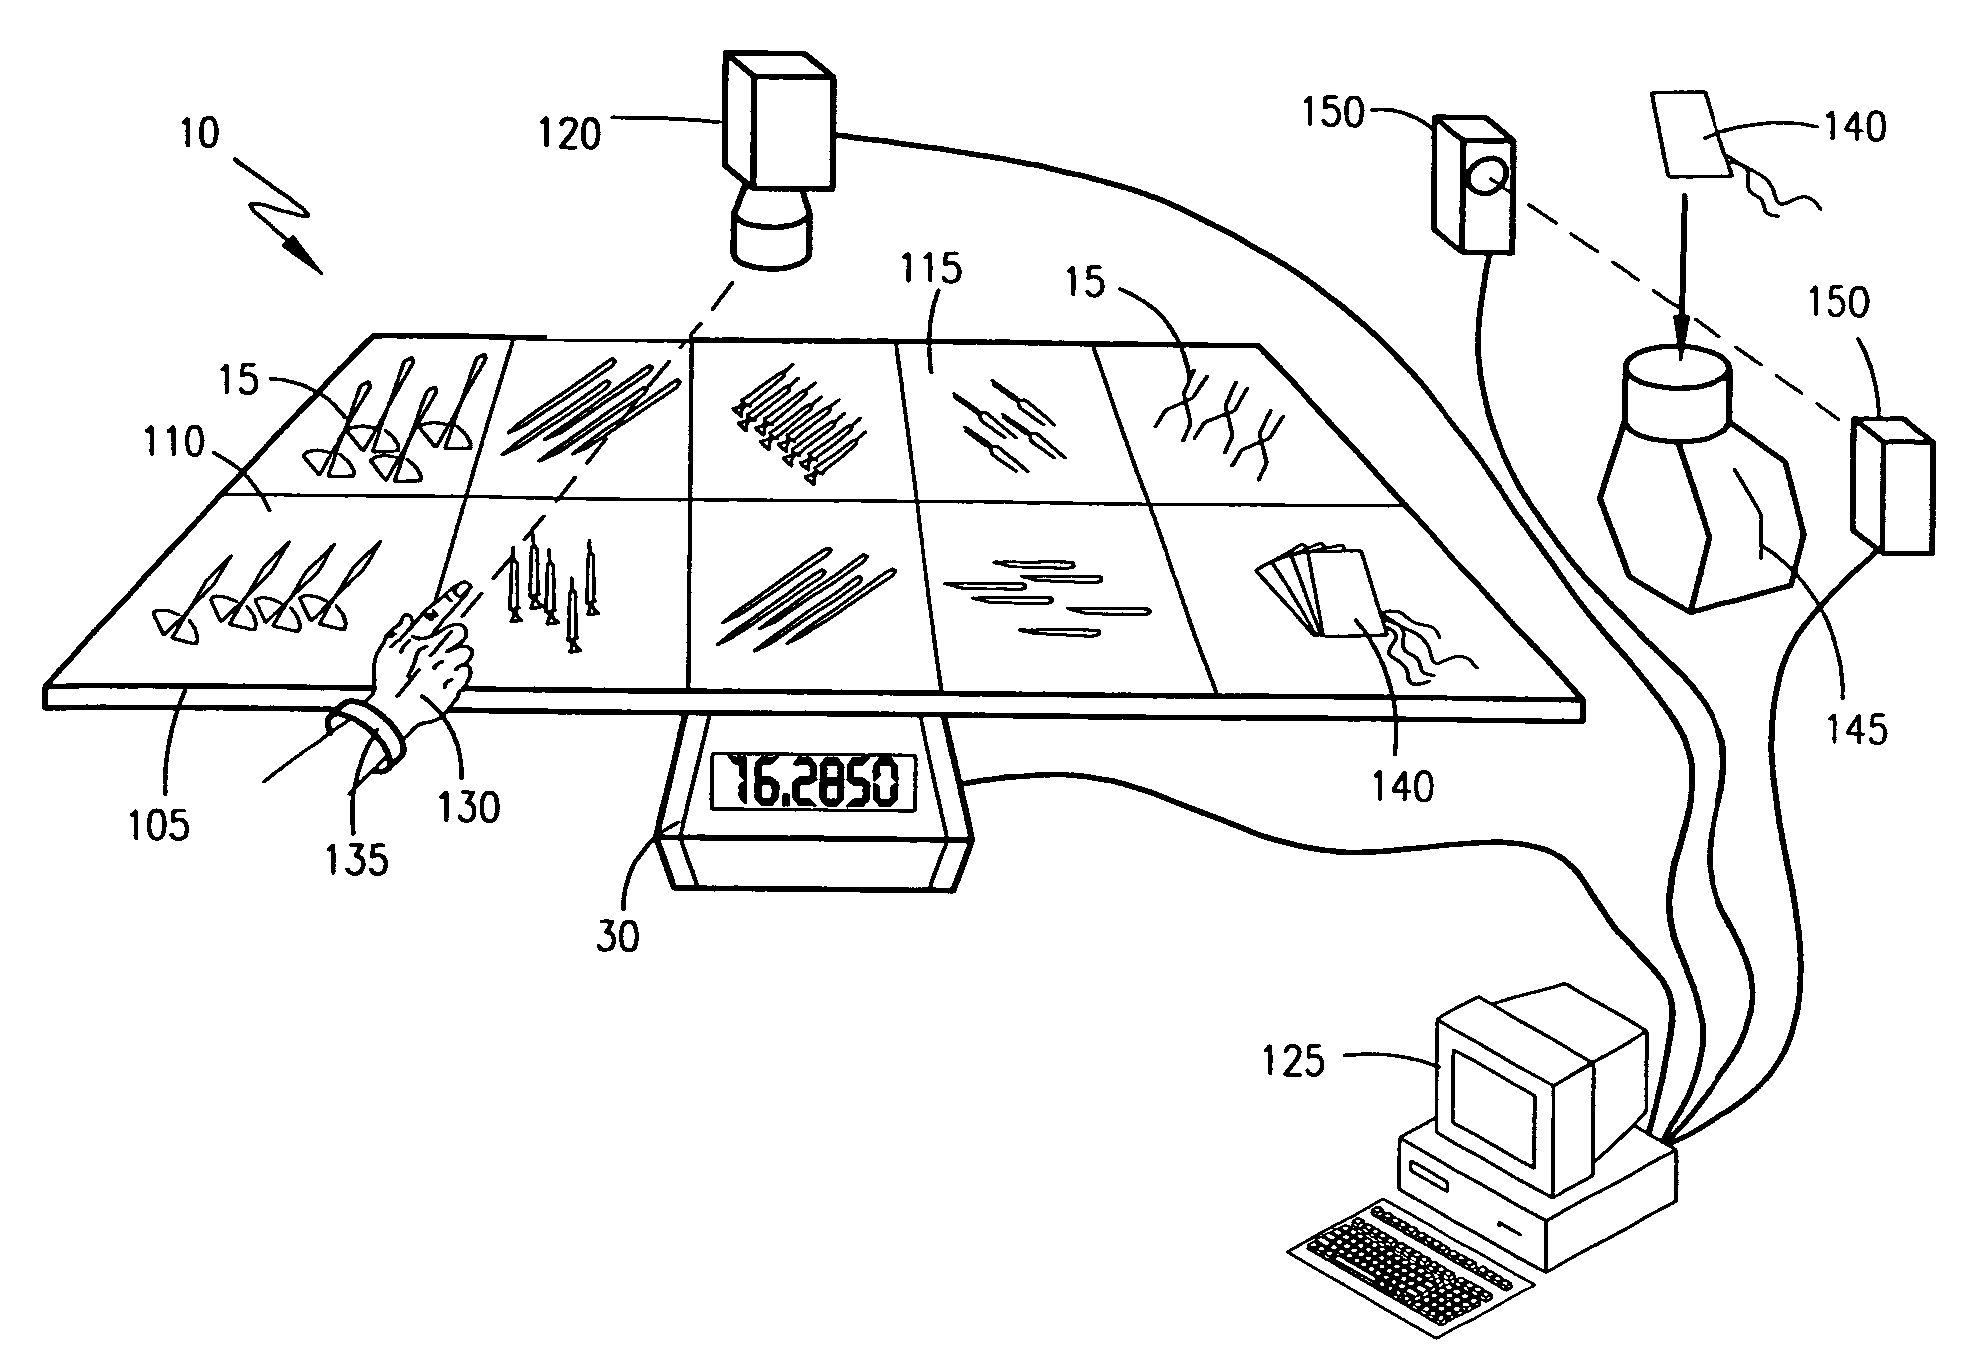 Method and equipment for automated tracking and identification of nonuniform items